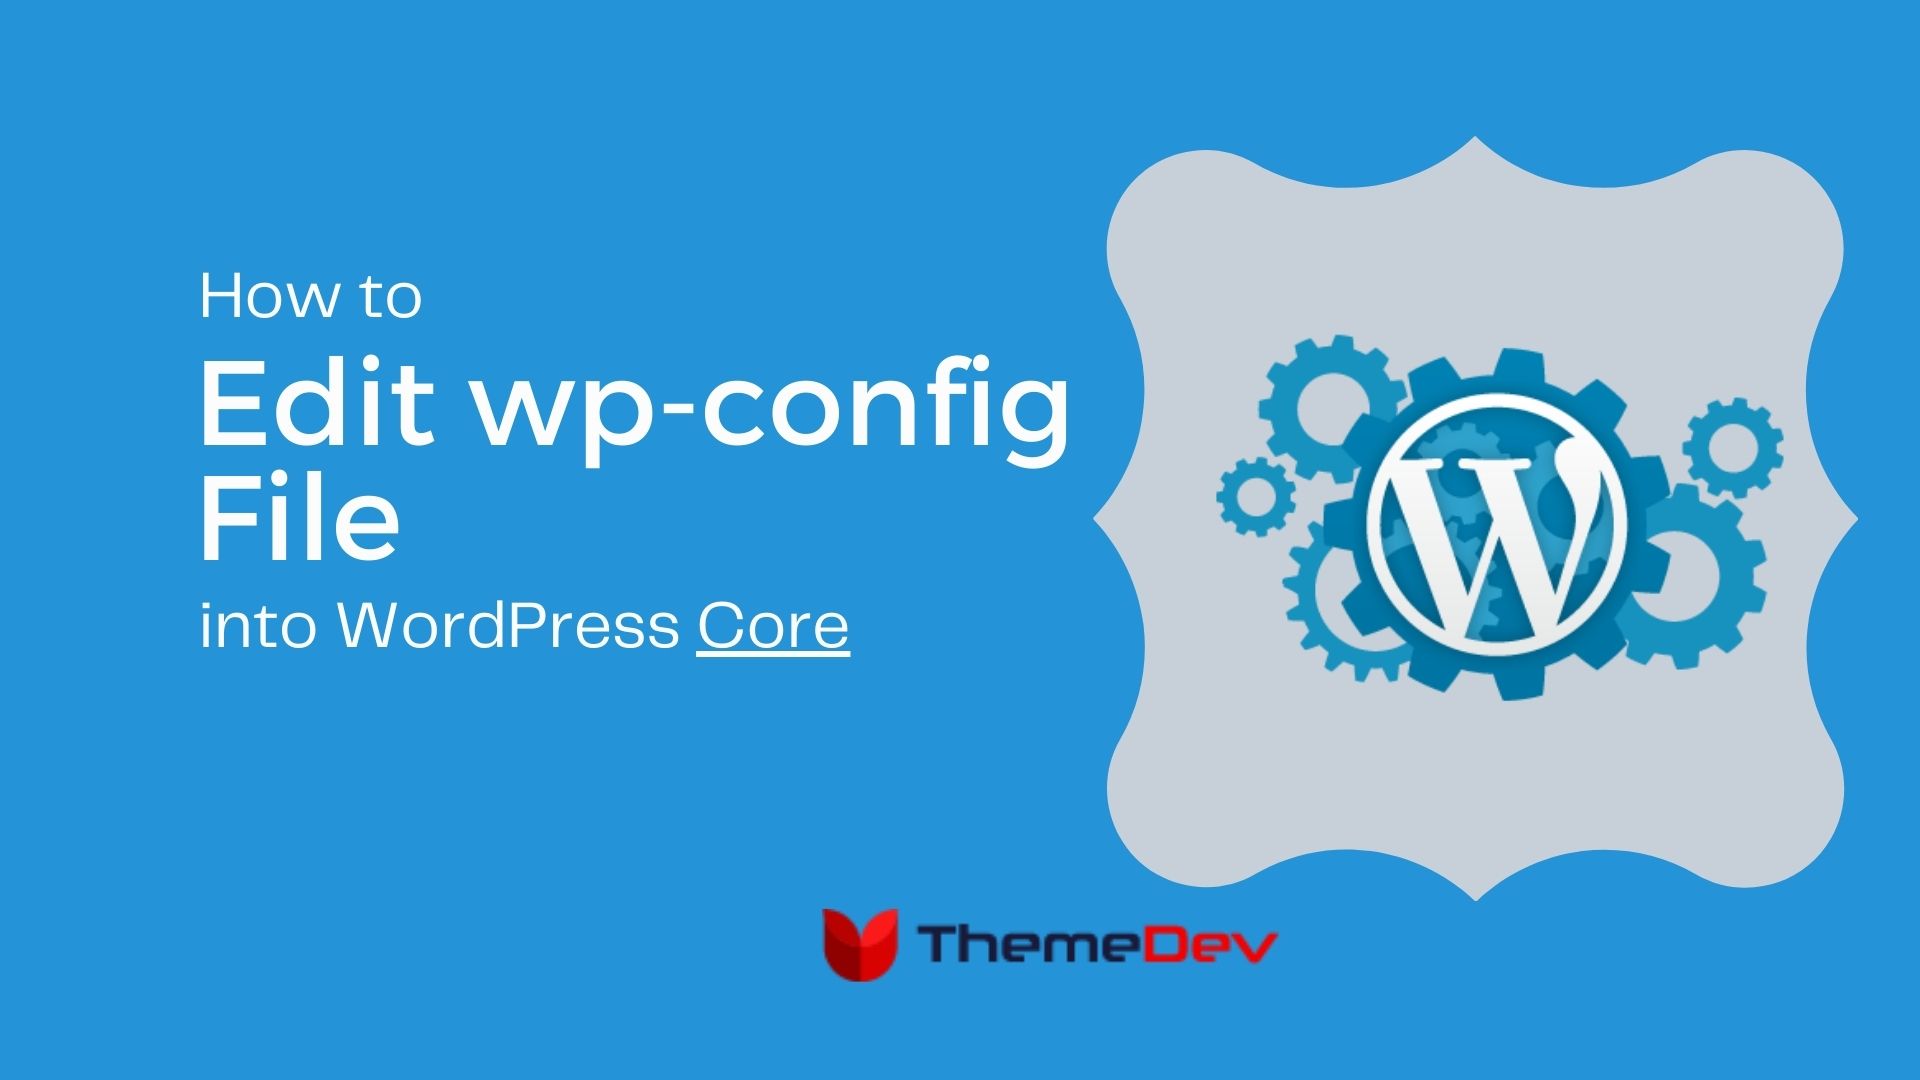 How to edit wp-config.php files on WordPress